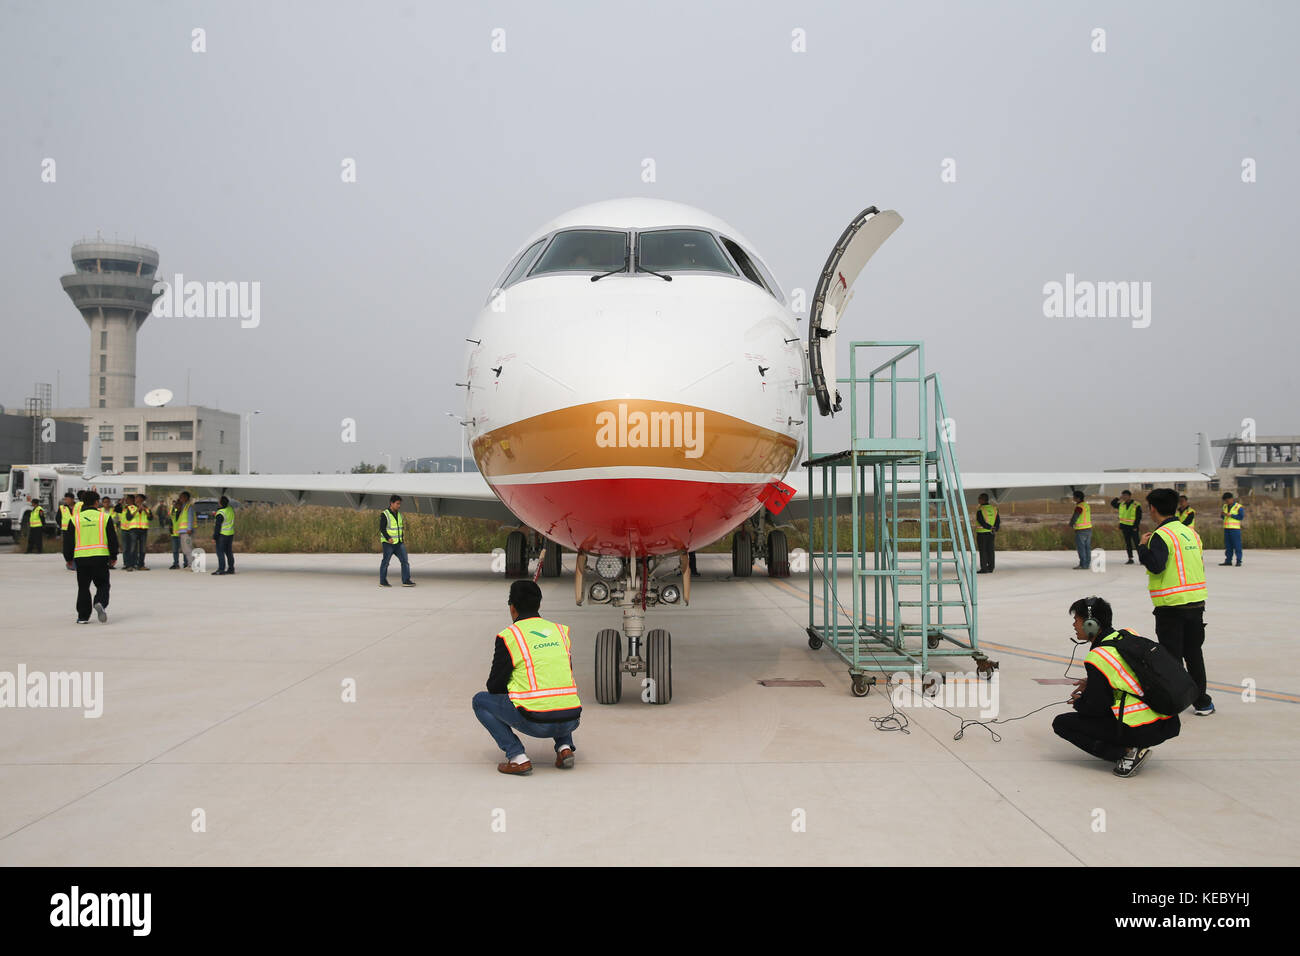 Shanghai. 14th Oct, 2017. Photo taken on Oct. 14, 2017 shows ARJ21-700 jetliner at Shengli Airport in Dongying of east China's Shandong Province. China's first domestic regional jetliner ARJ21-700 was delivered Thursday after its mass production was certified in July. The ARJ21-700 jetliner has 90 economy seats and was bought by China Aerospace Leasing Company, and delivered to Chengdu Airlines. The Commercial Aircraft Corporation of China (COMAC) obtained a production license to build the airliner from the General Administration of Civil Aviation. Credit: Ding Ting/Xinhua/Alamy Live News Stock Photo